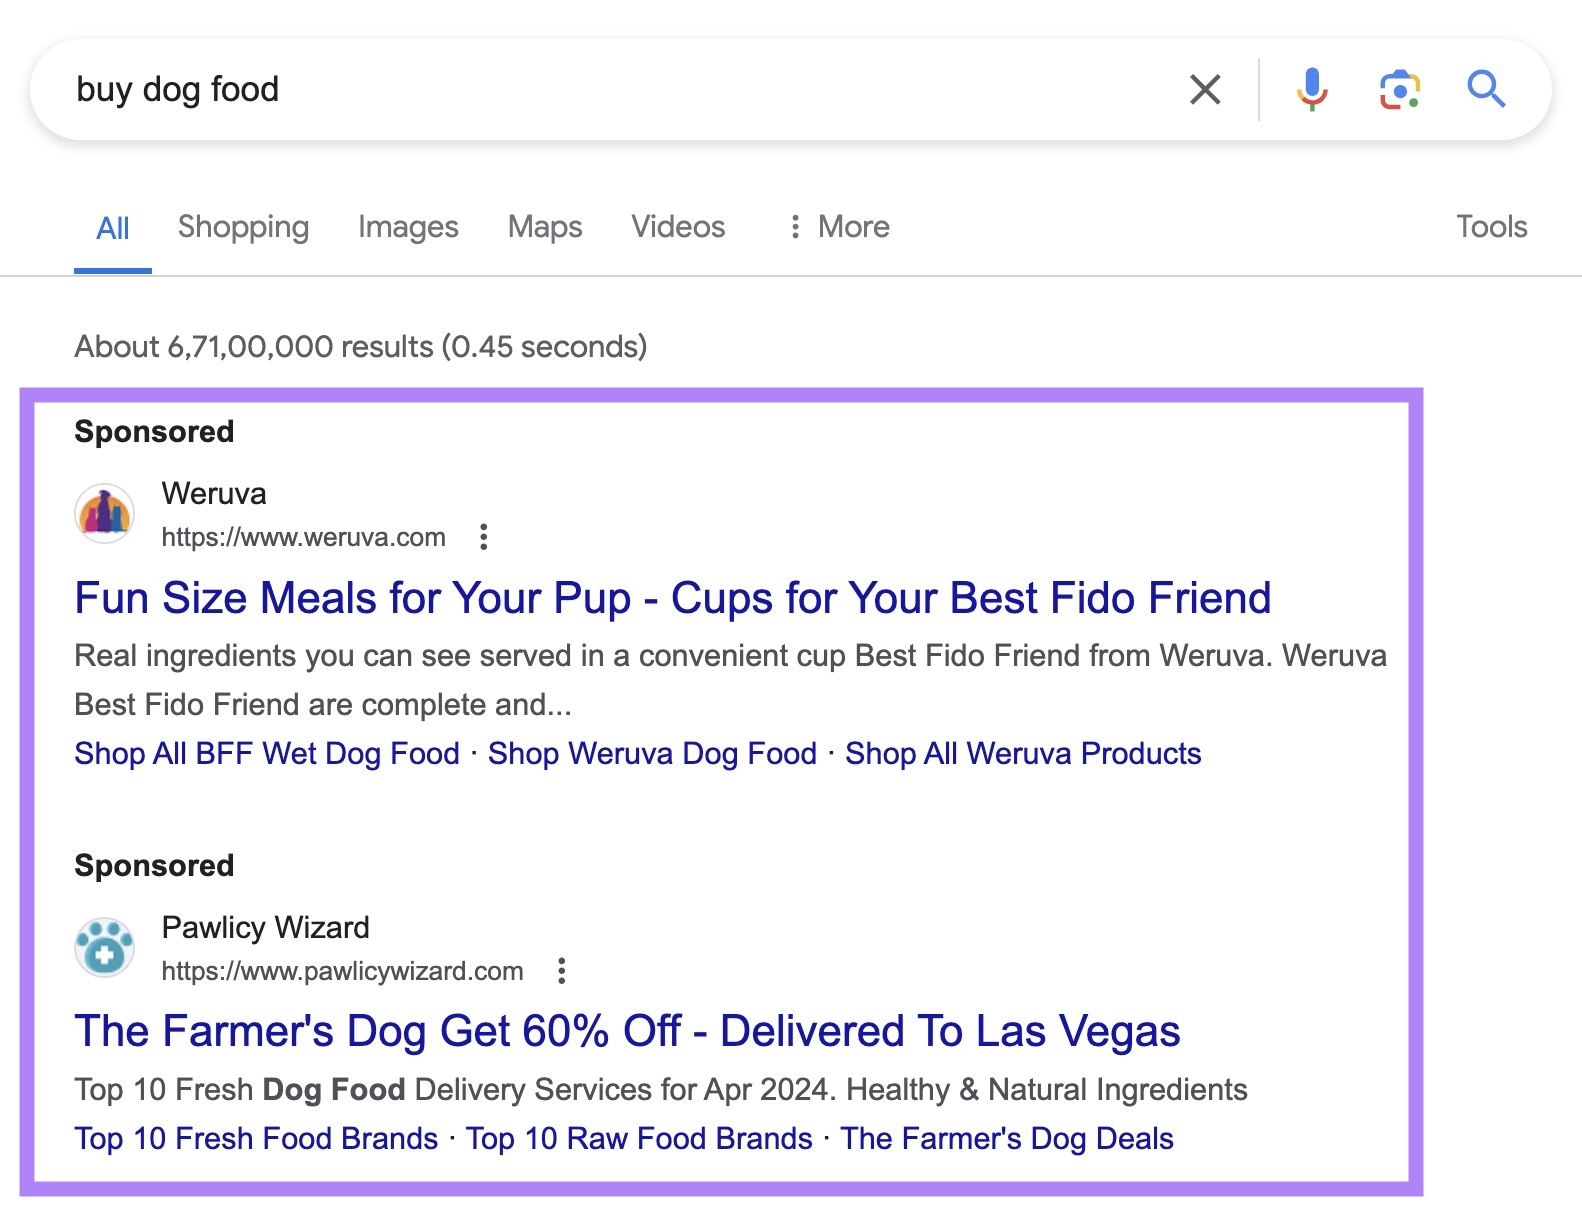 Sponsored results for the term 'buy dog food' on Google's SERP.